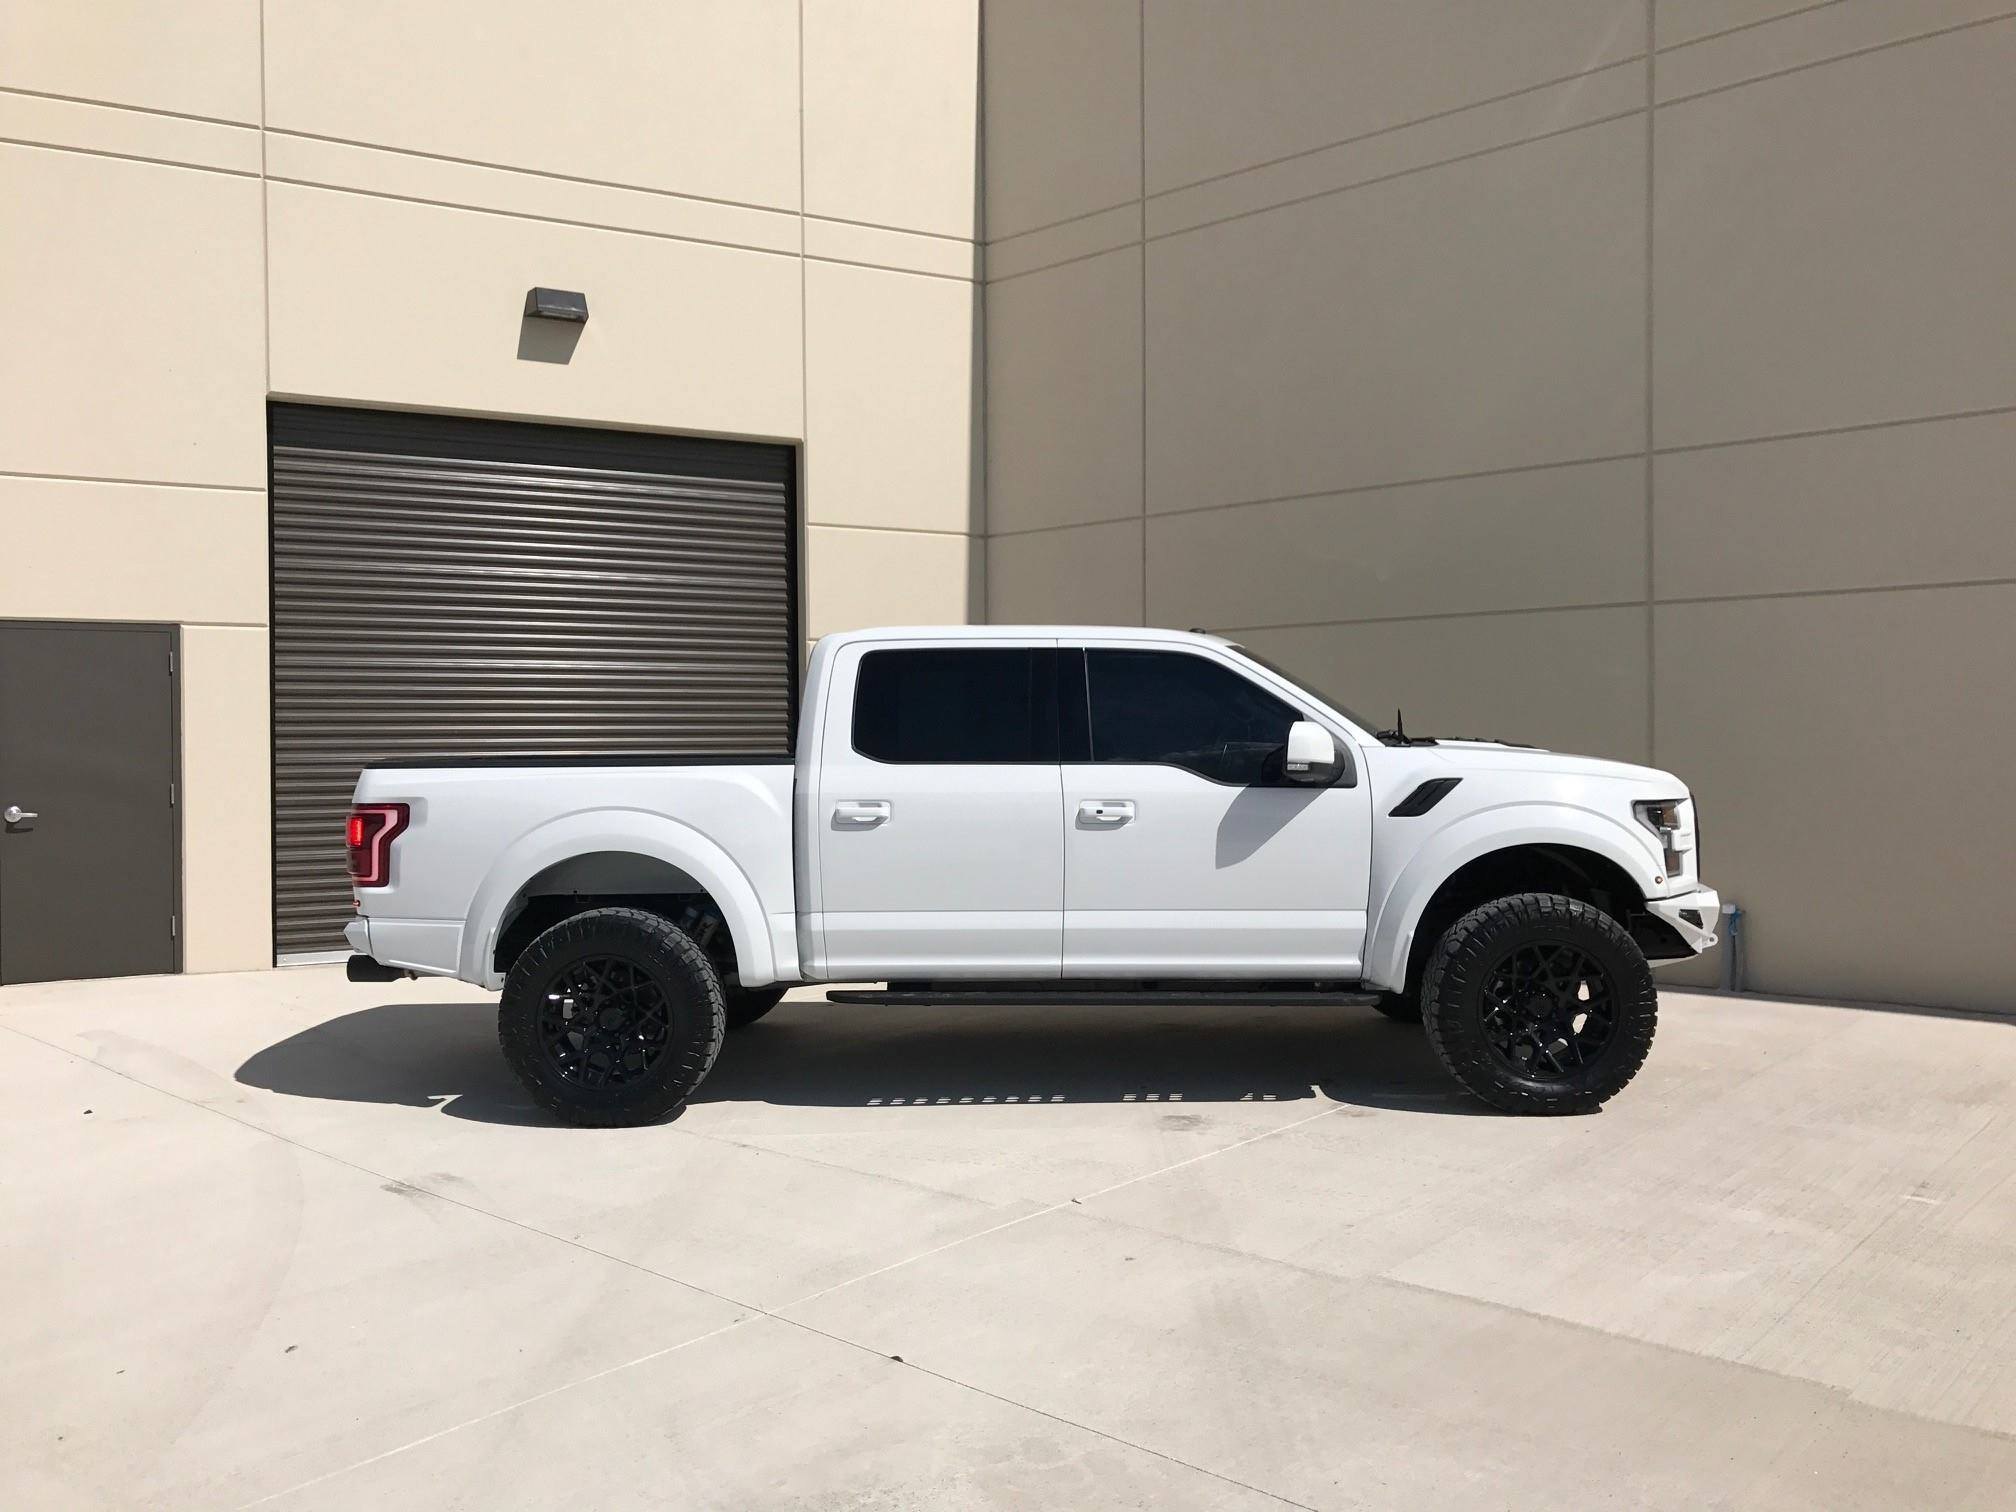 Aftermarket Running Boards on White Lifted Ford F-150 - Photo by Addictive Desert Designs